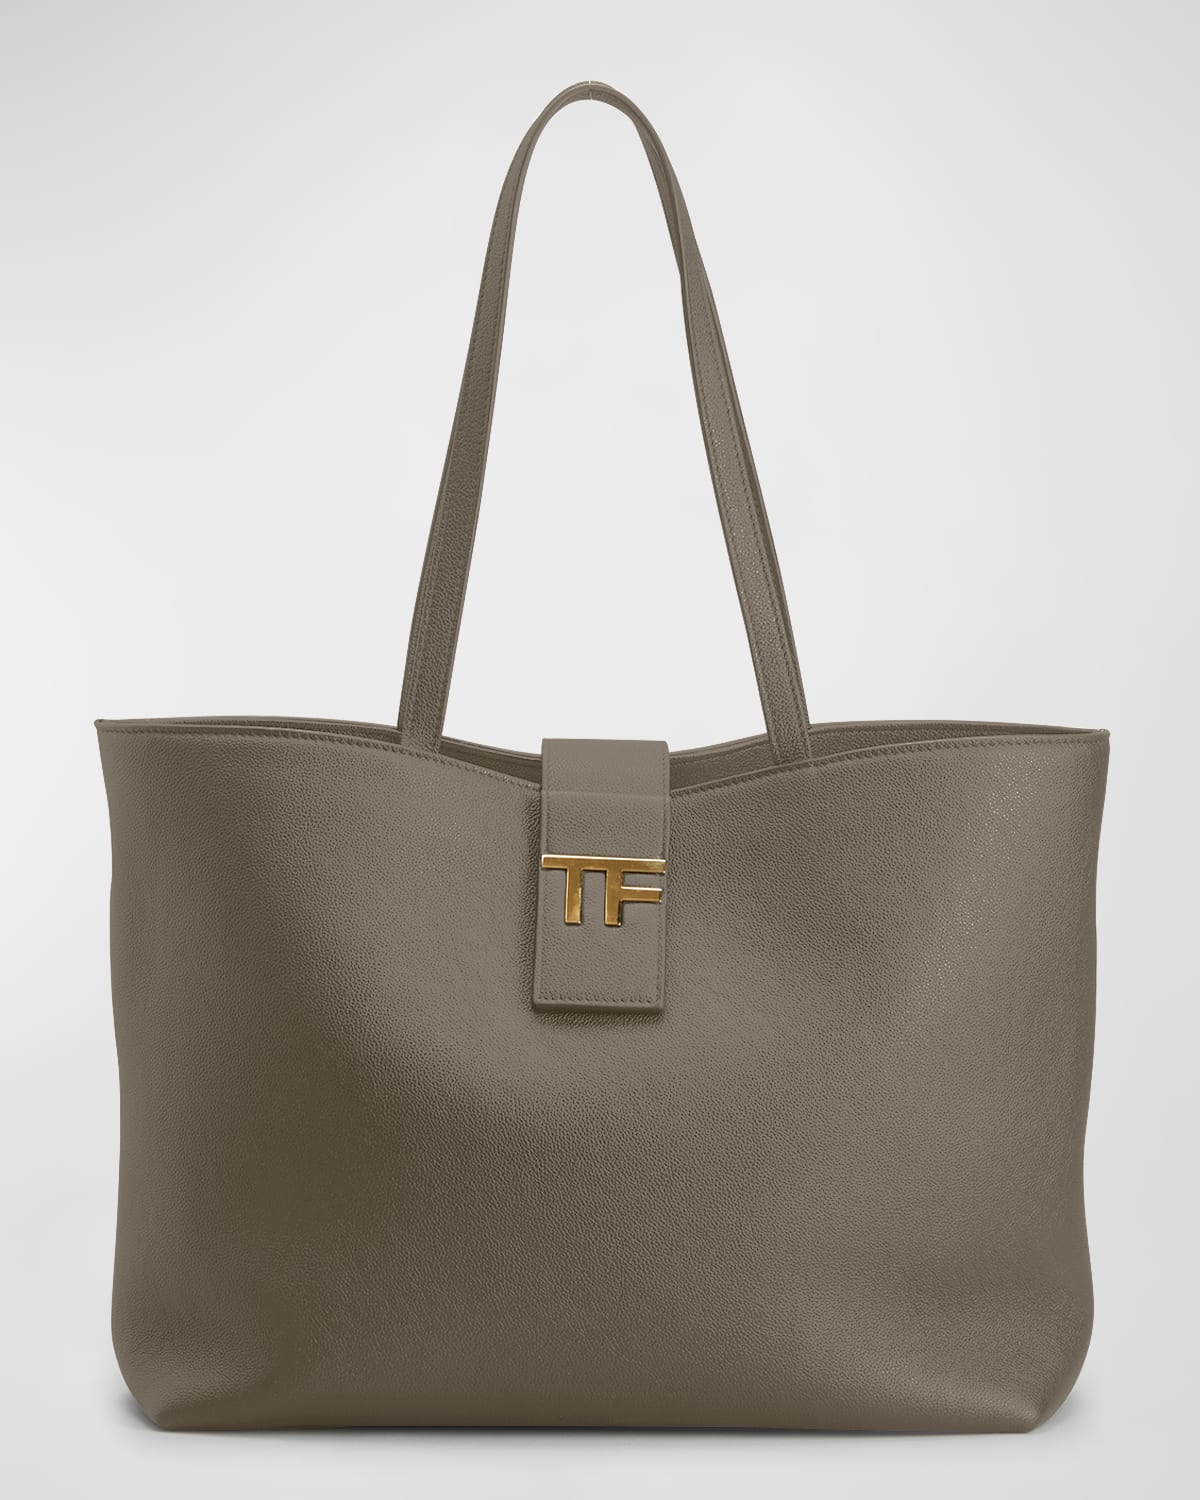 TOM FORD TF SMALL E/W TOTE IN GRAINED LEATHER